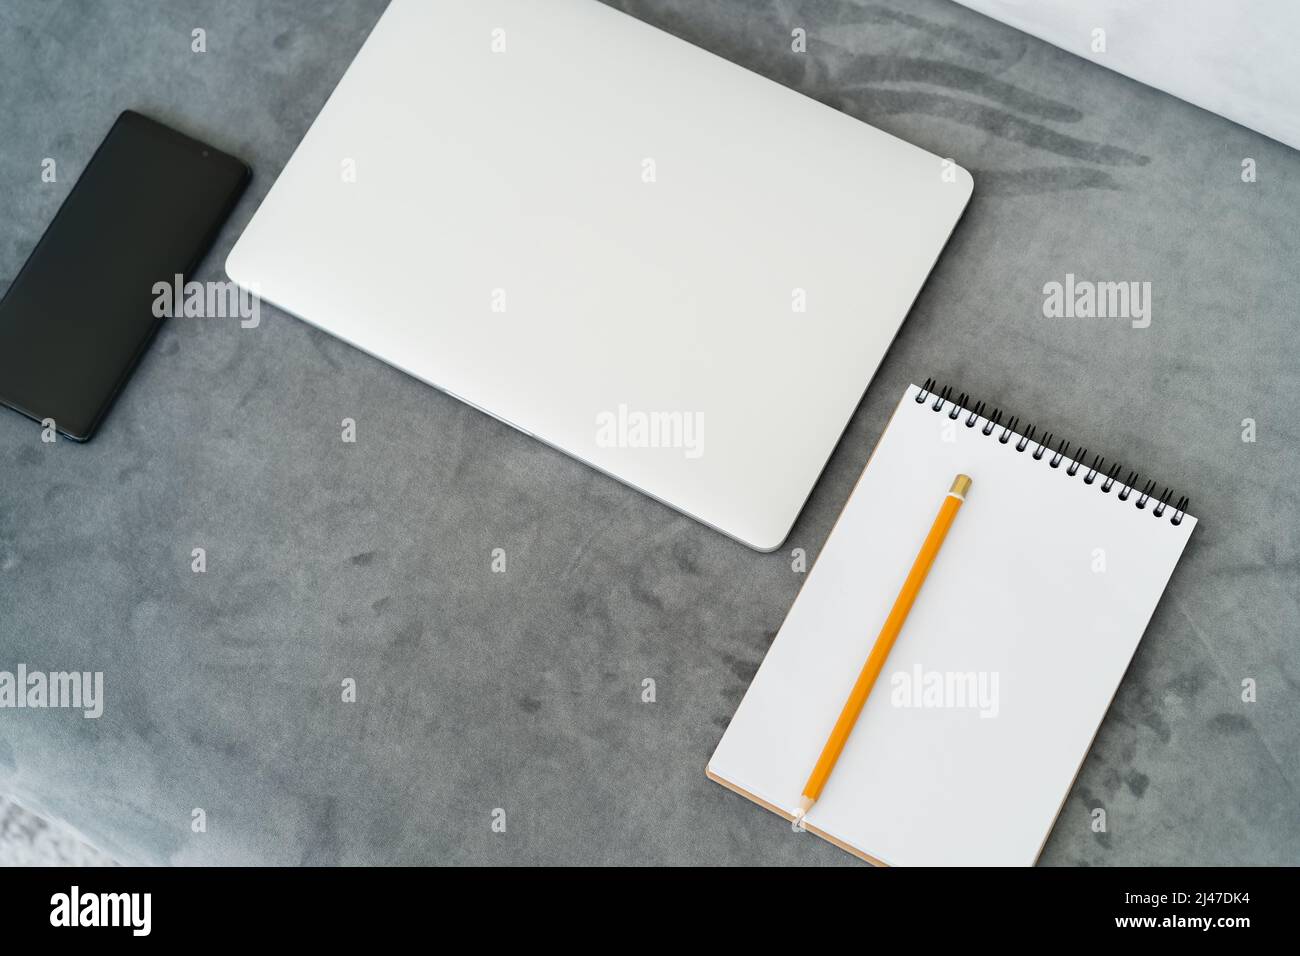 top view of closed laptop, empty notebook with pencil and smartphone with blank screen on grey surface Stock Photo